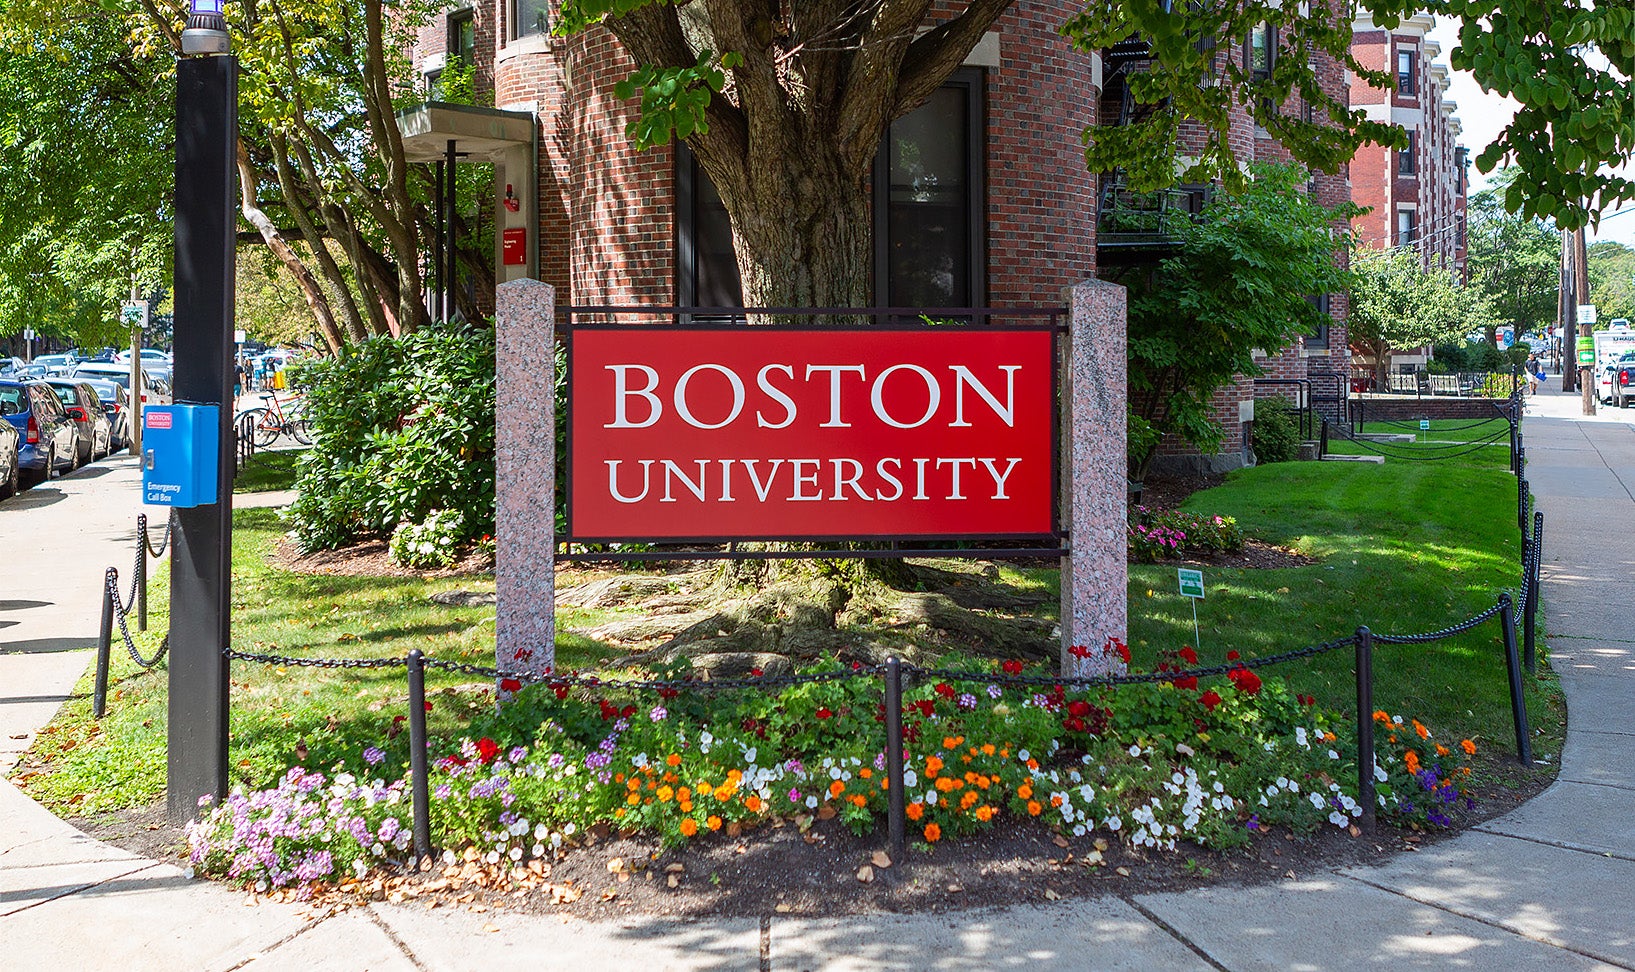 A red sign that says "Boston University" stands outside a university building.